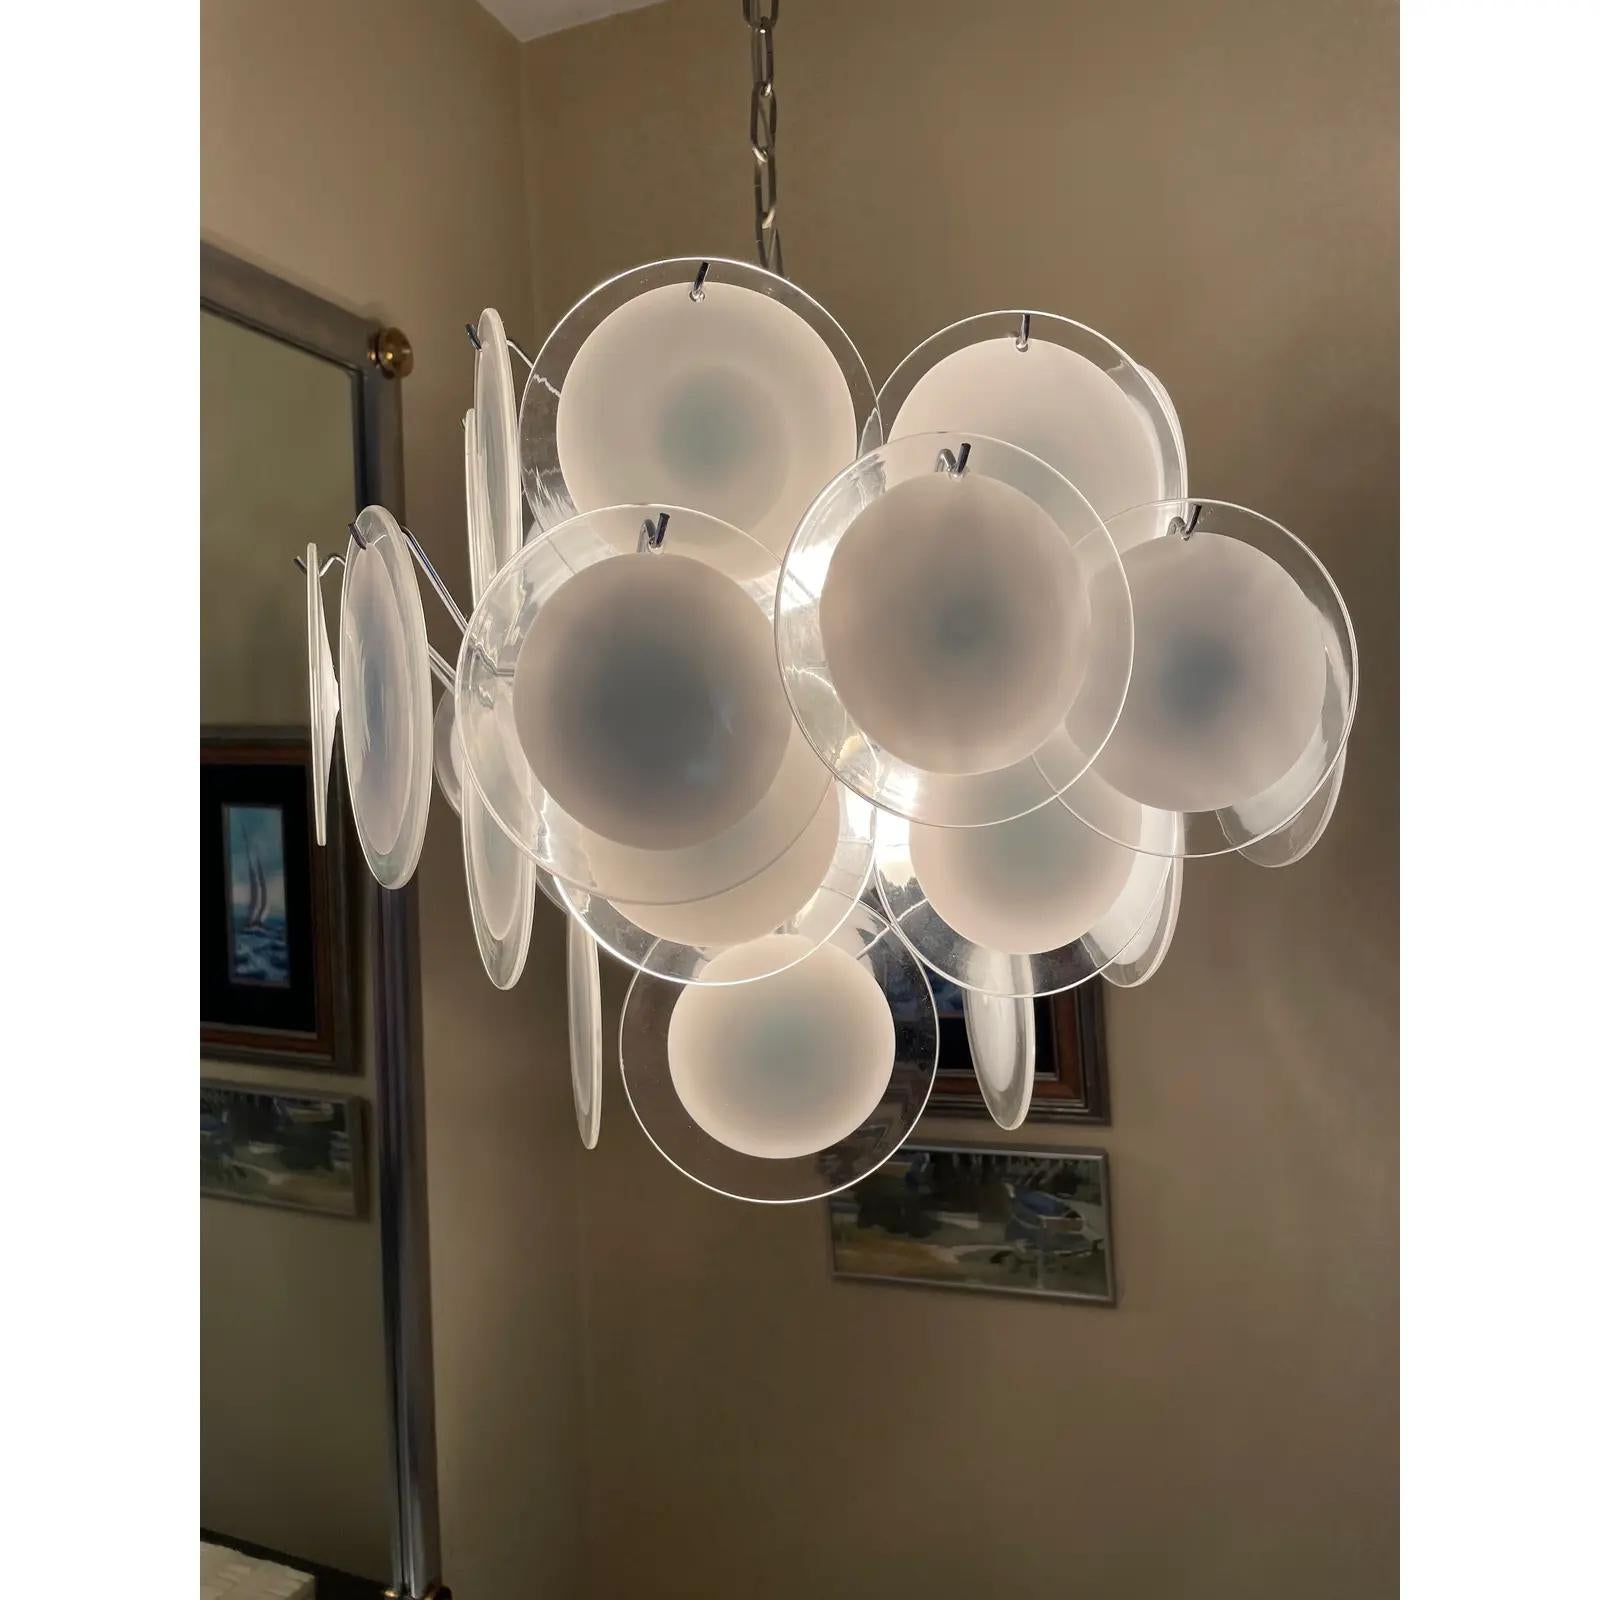 Gino Vistosi and Murano chandelier/swag made in Italy. 32 milk and clear handblown Murano glass discs chrome fixture and chain.
Curbside to NYC/Philly $350